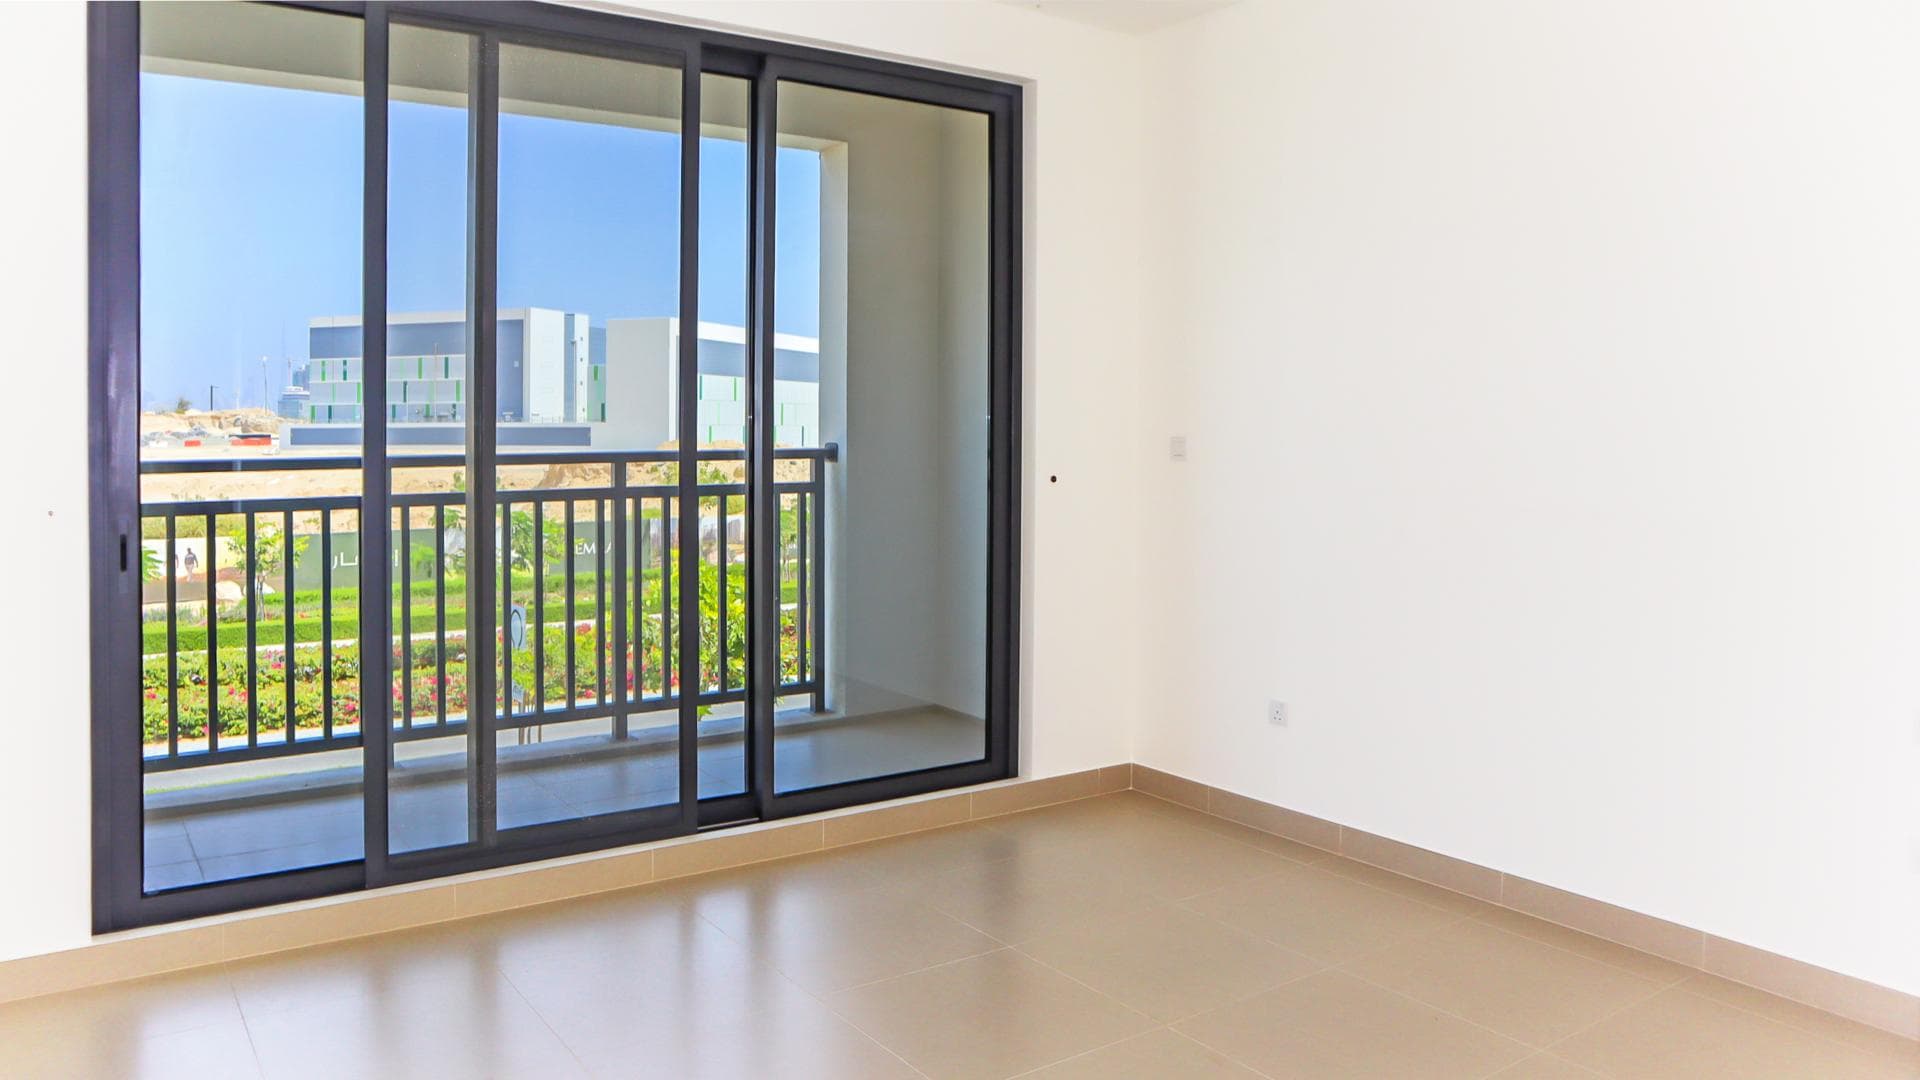 3 Bedroom Townhouse For Rent Maple At Dubai Hills Estate Lp17647 20cde9ee9fa6ce00.jpg